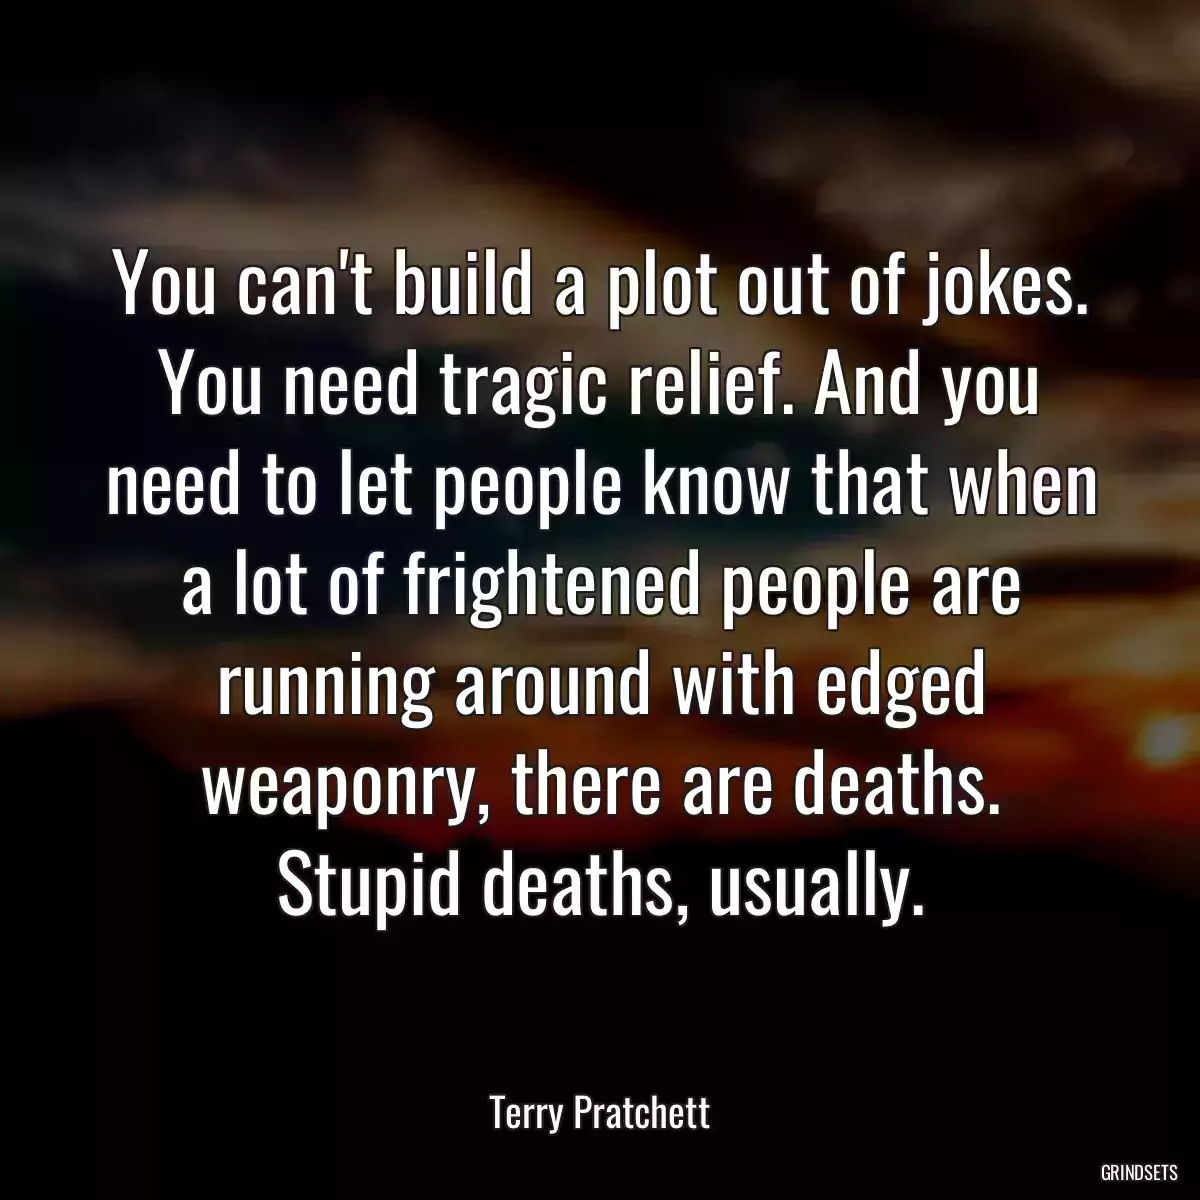 You can\'t build a plot out of jokes. You need tragic relief. And you need to let people know that when a lot of frightened people are running around with edged weaponry, there are deaths. Stupid deaths, usually.